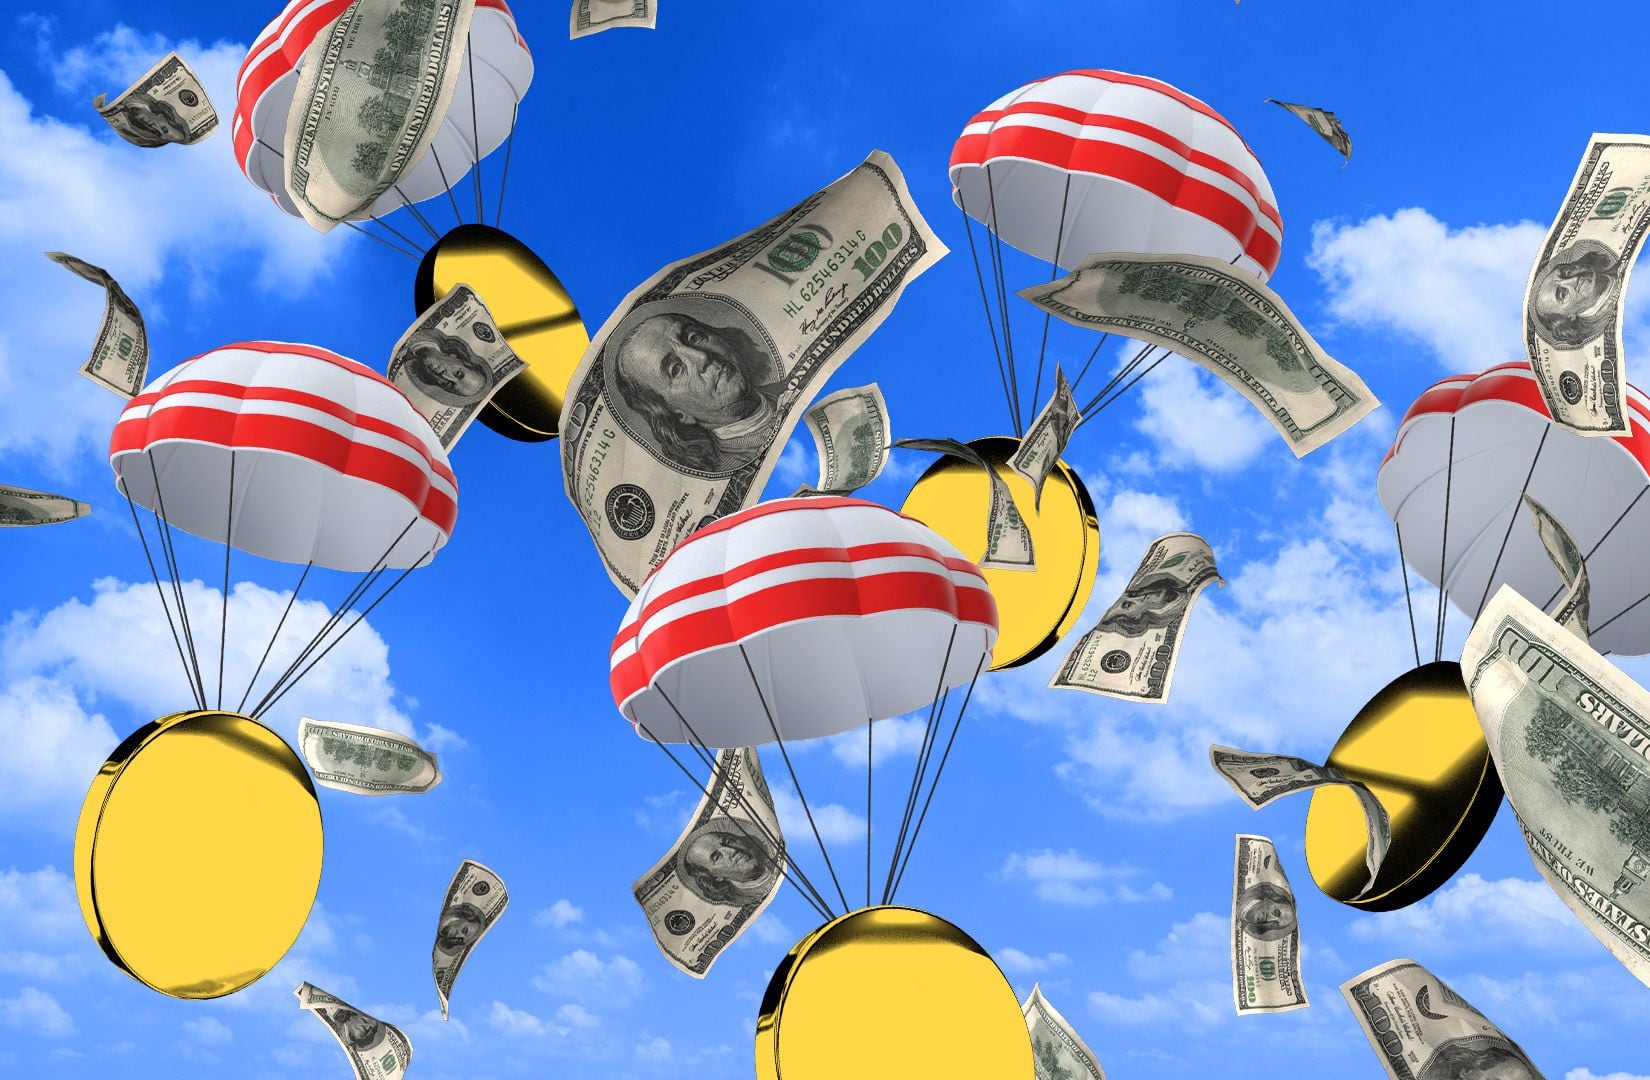 More airdrops are coming, promising billions in tokens. Here’s why users are complaining